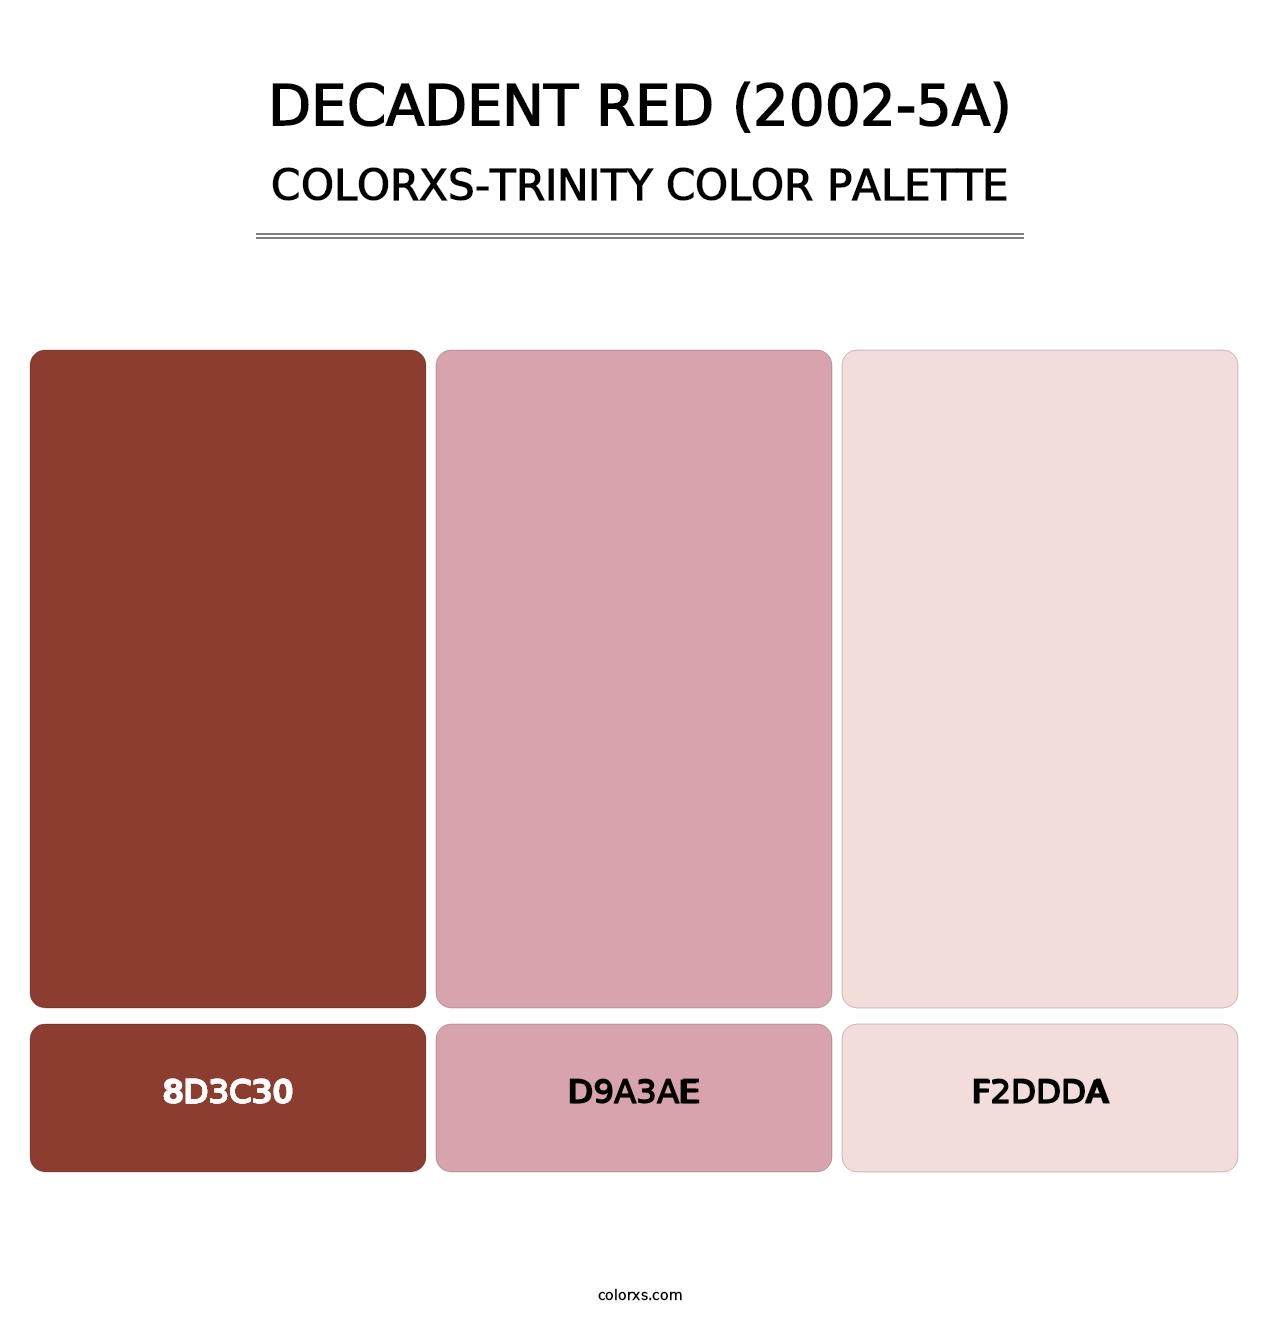 Decadent Red (2002-5A) - Colorxs Trinity Palette